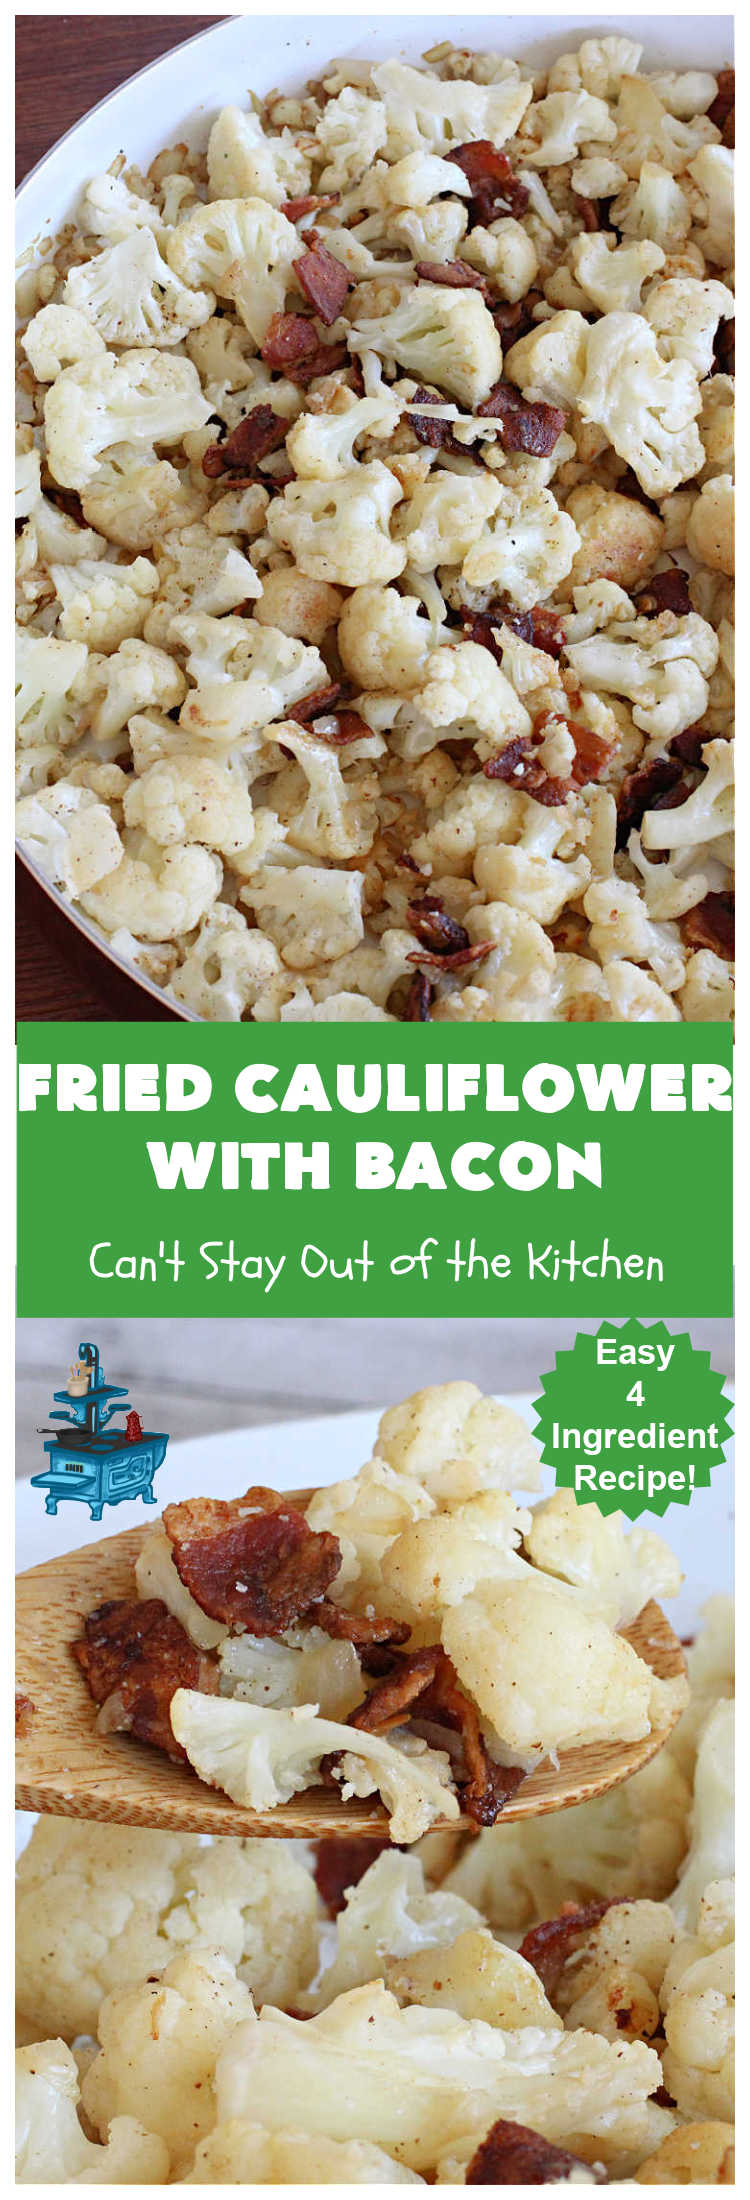 Fried Cauliflower with Bacon | Can't Stay Out of the Kitchen | this quick & easy 4-ingredient #recipe is a great #SideDish for family, company or even #holiday dinners. It tastes amazing & pairs wonderfully with just about any entree. This #GlutenFree dish is a great way to get your kids to eat their #veggies! #bacon #pork #cauliflower #TonysCreoleSeasoning #FriedCauliflowerWithBacon